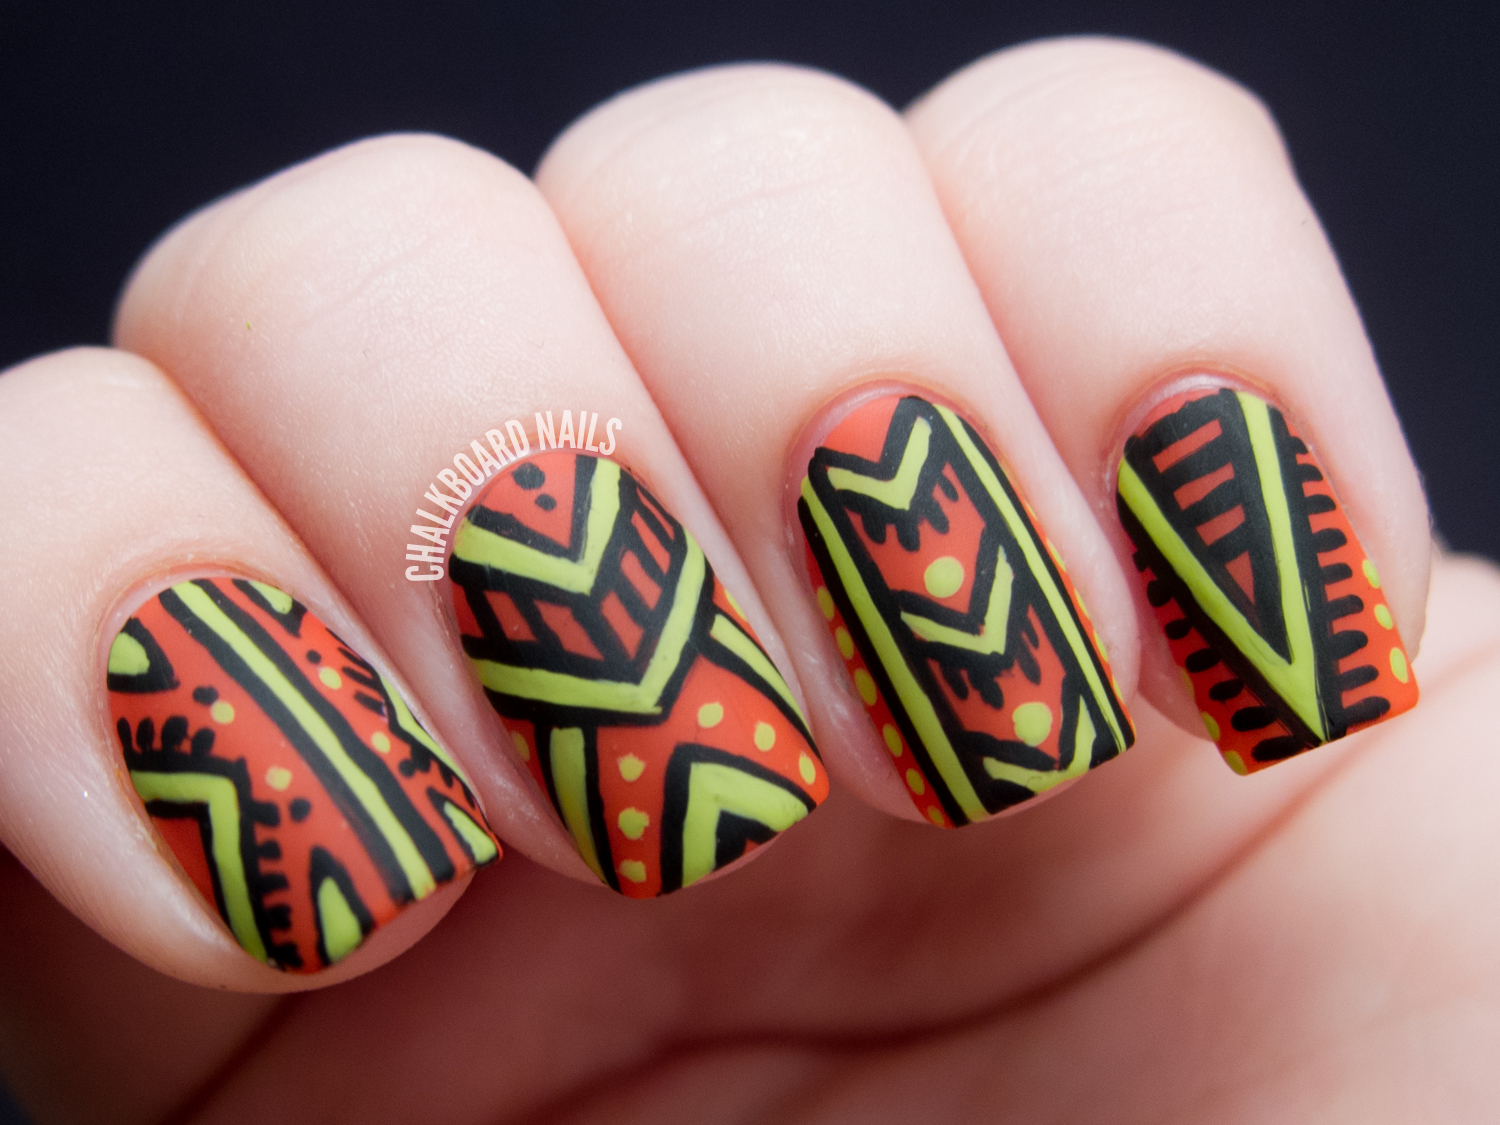 3. Affordable Nail Art Products in South Africa - wide 5